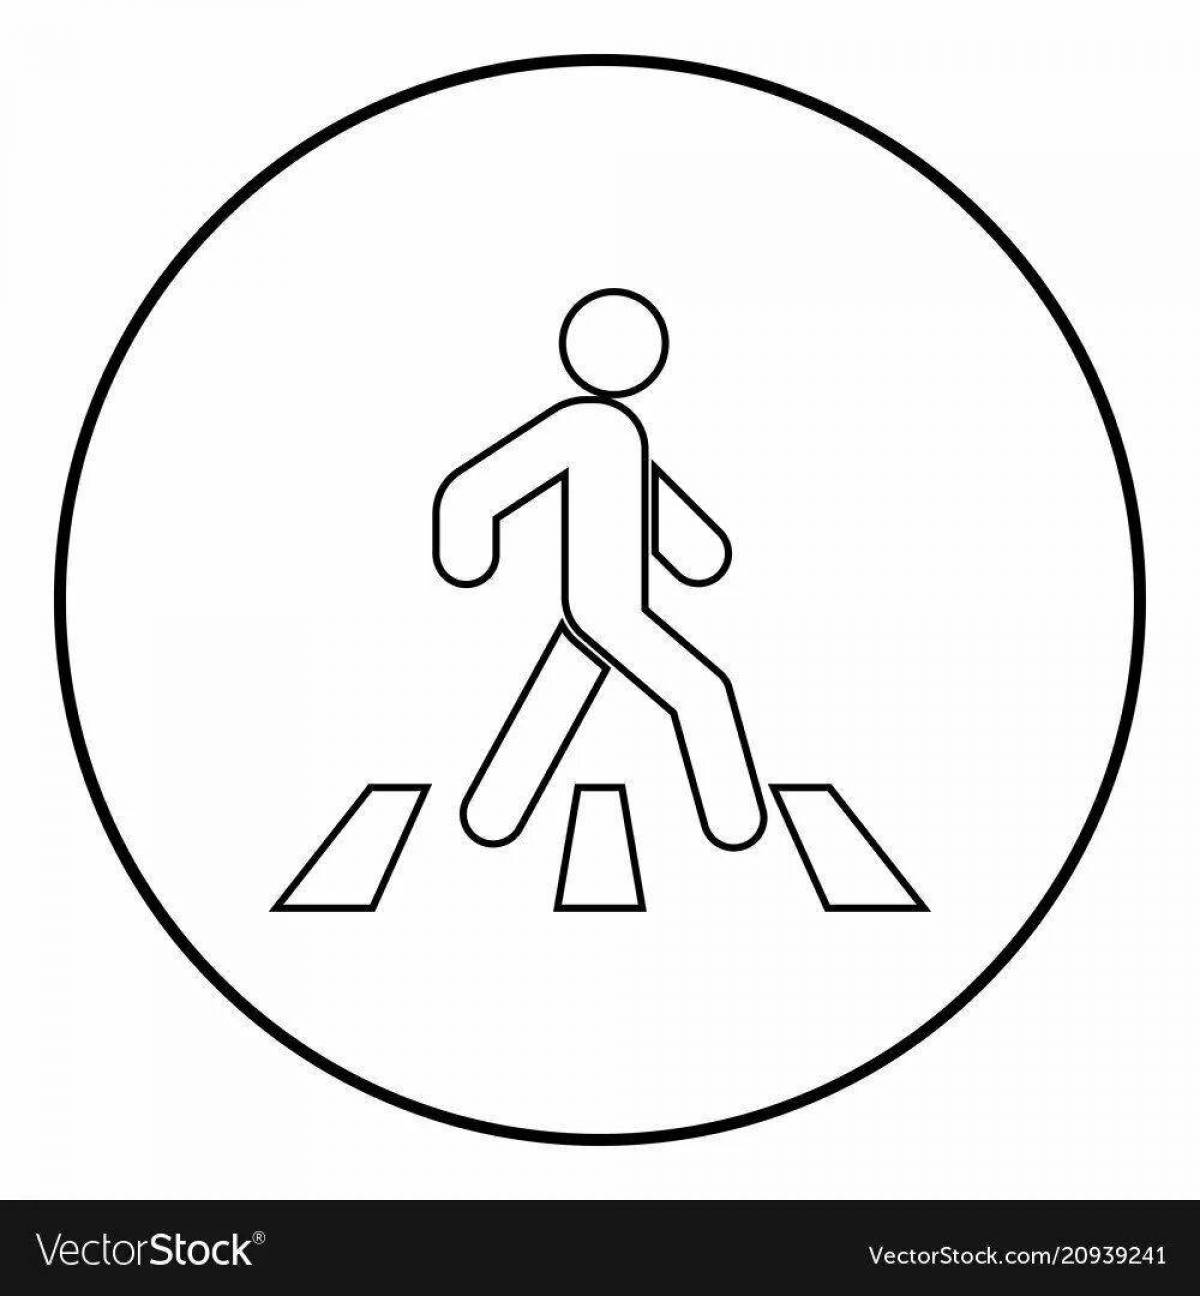 Coloring page live pedestrian crossing traffic sign